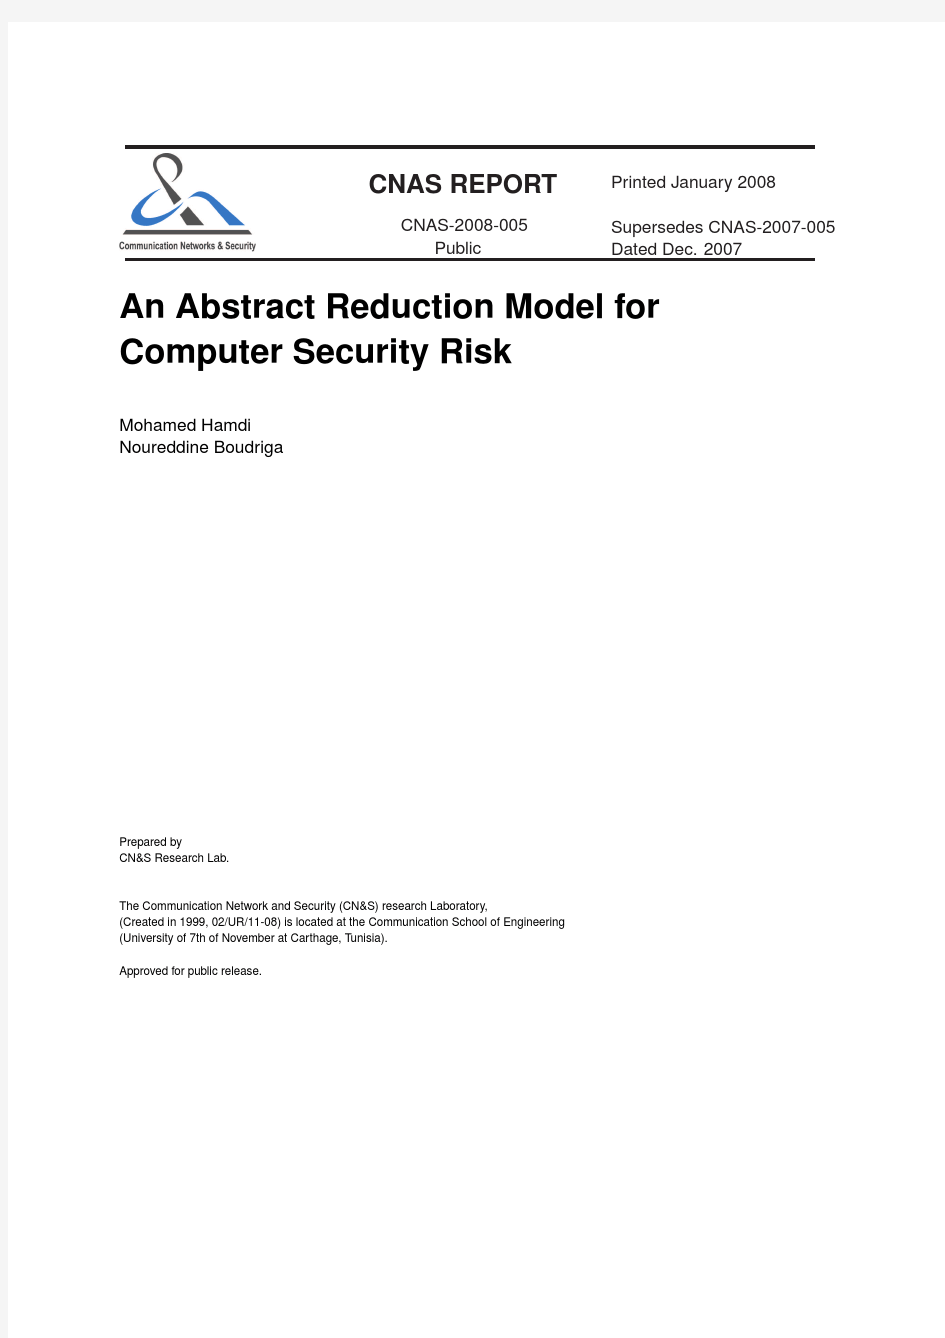 AN ABSTRACT REDUCTION MODEL FOR COMPUTER SECURITY RISK